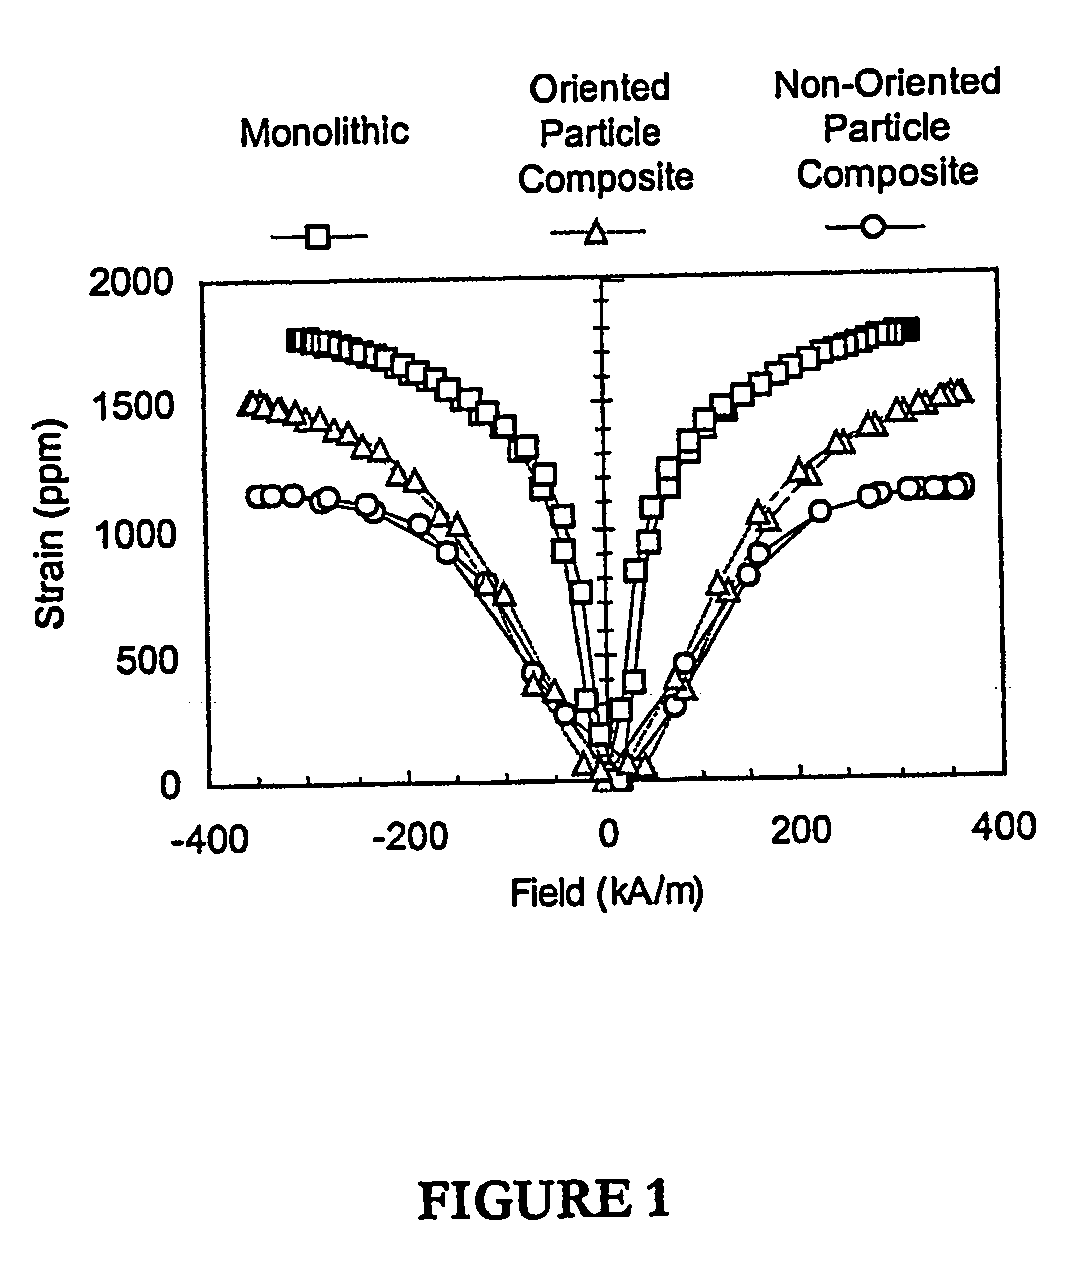 Directionally oriented particle composites